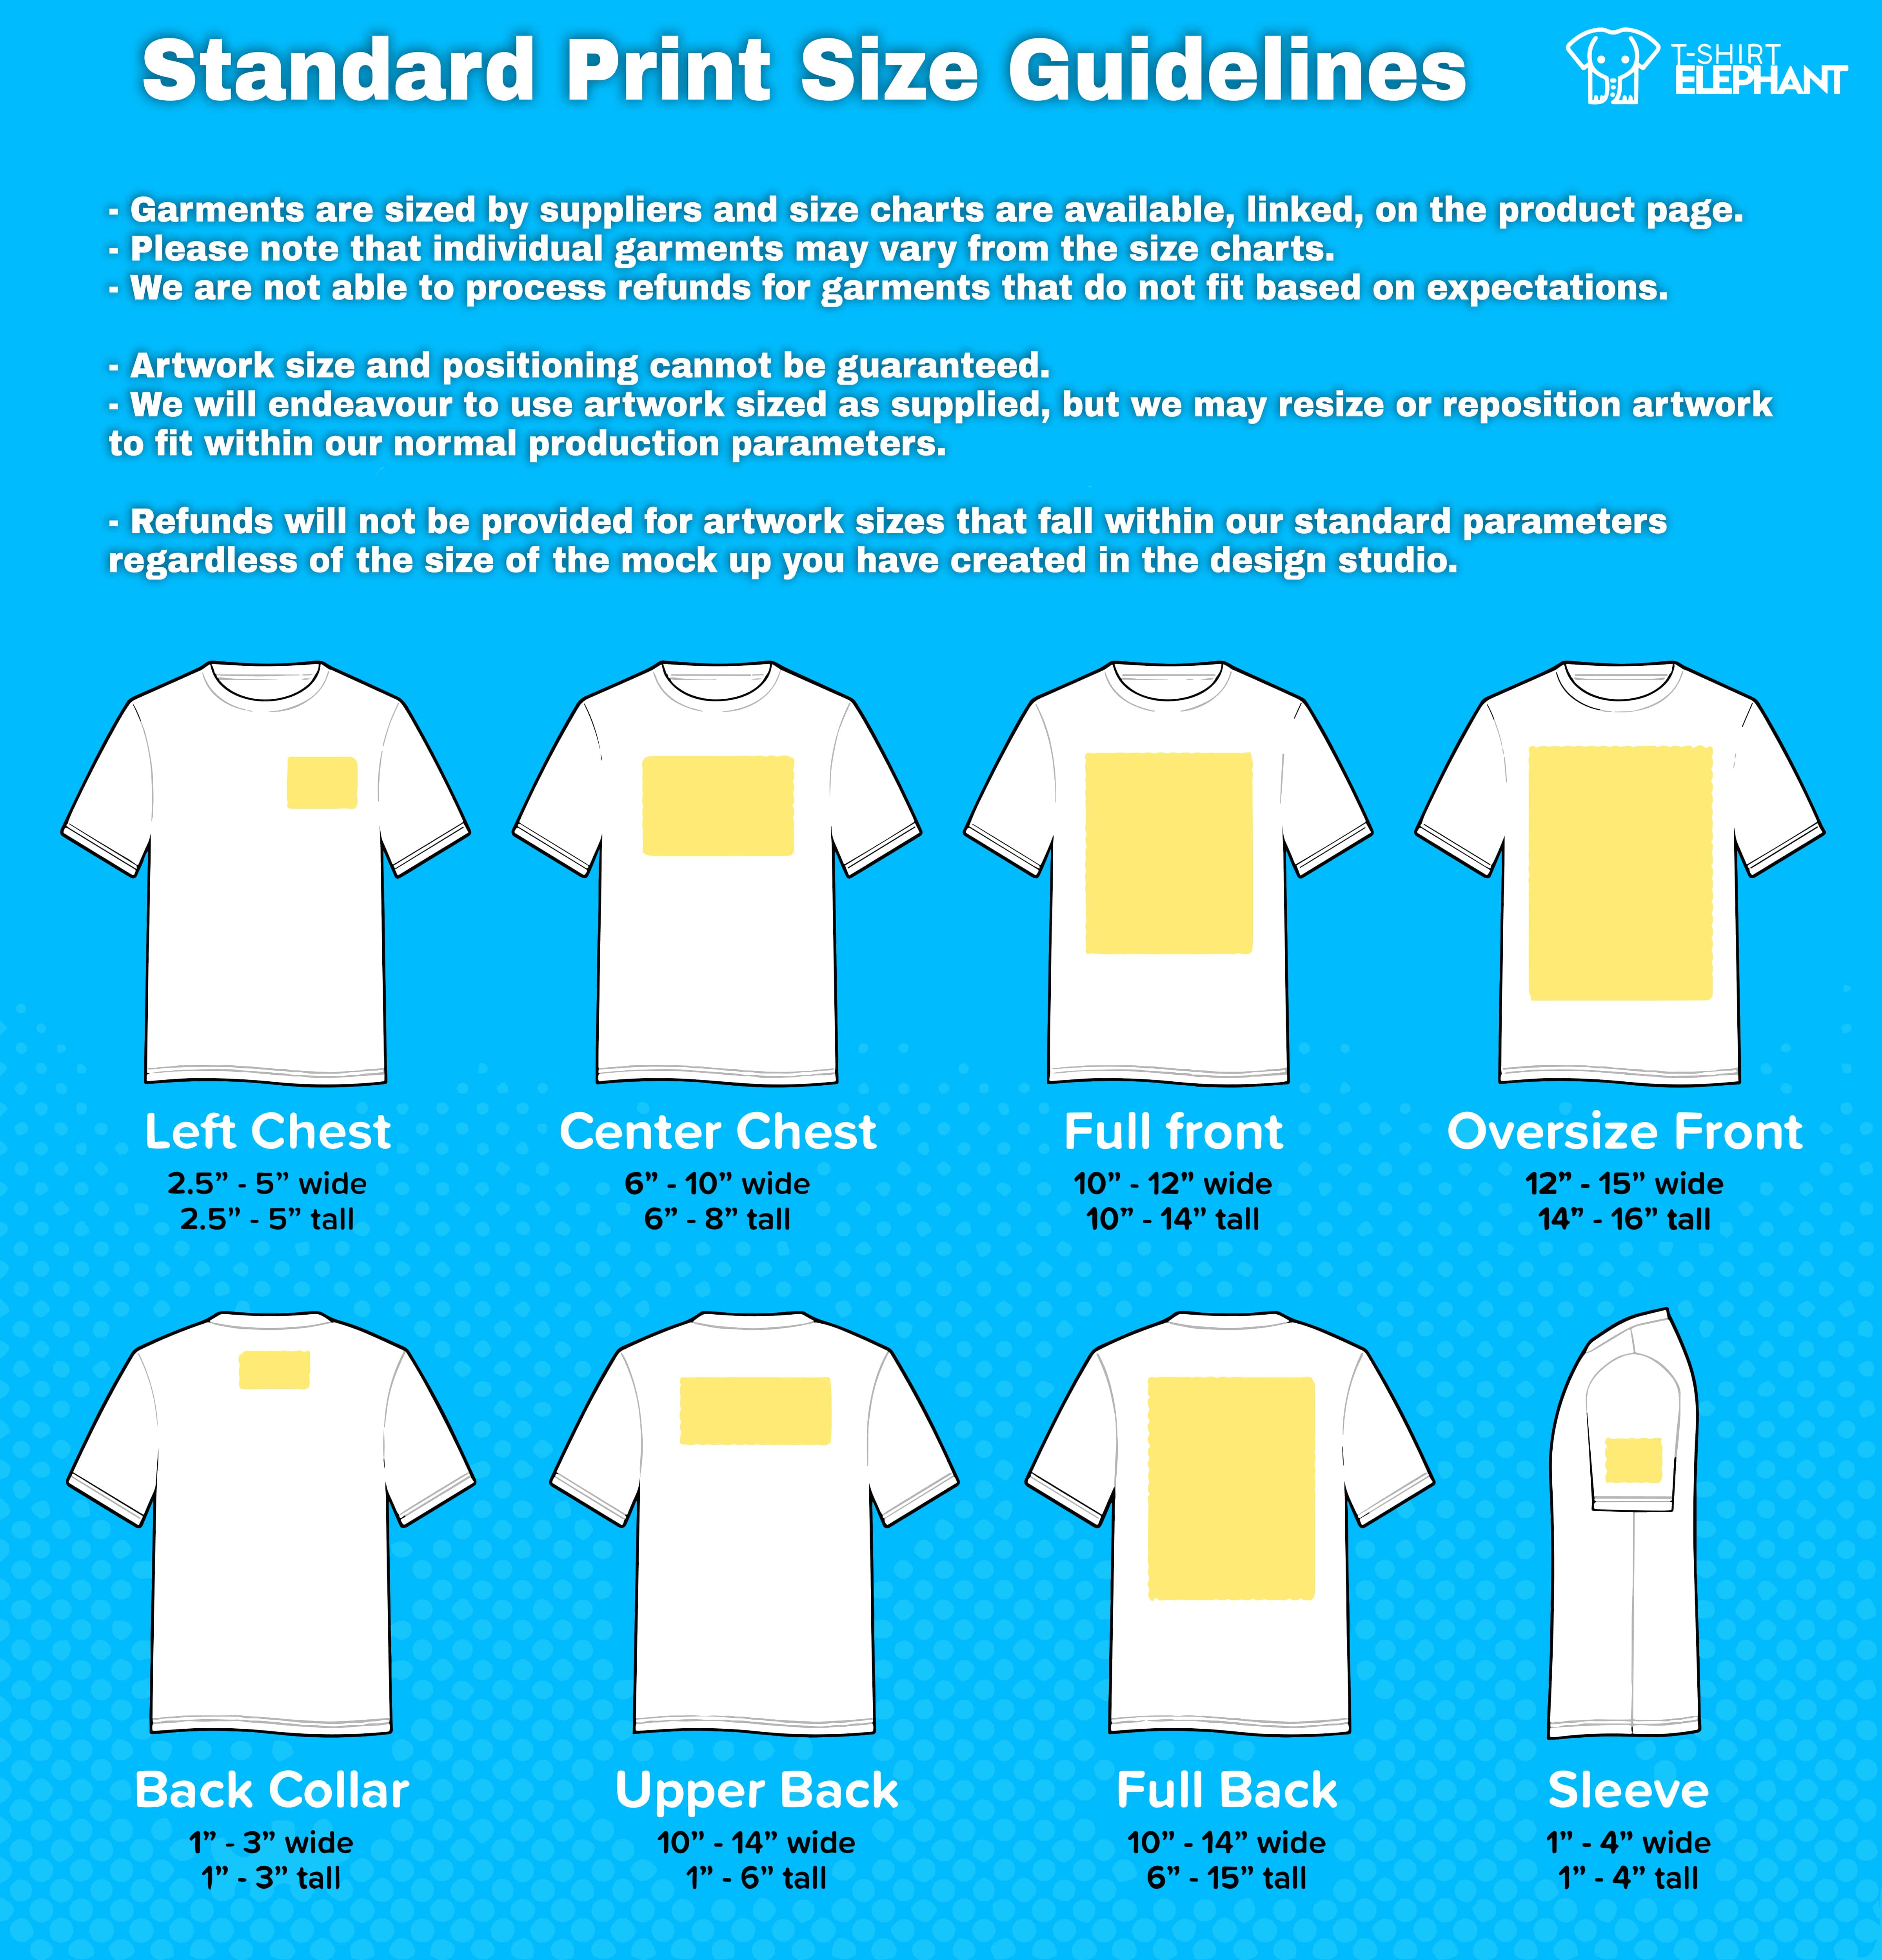 Standard Print Size Guidelines